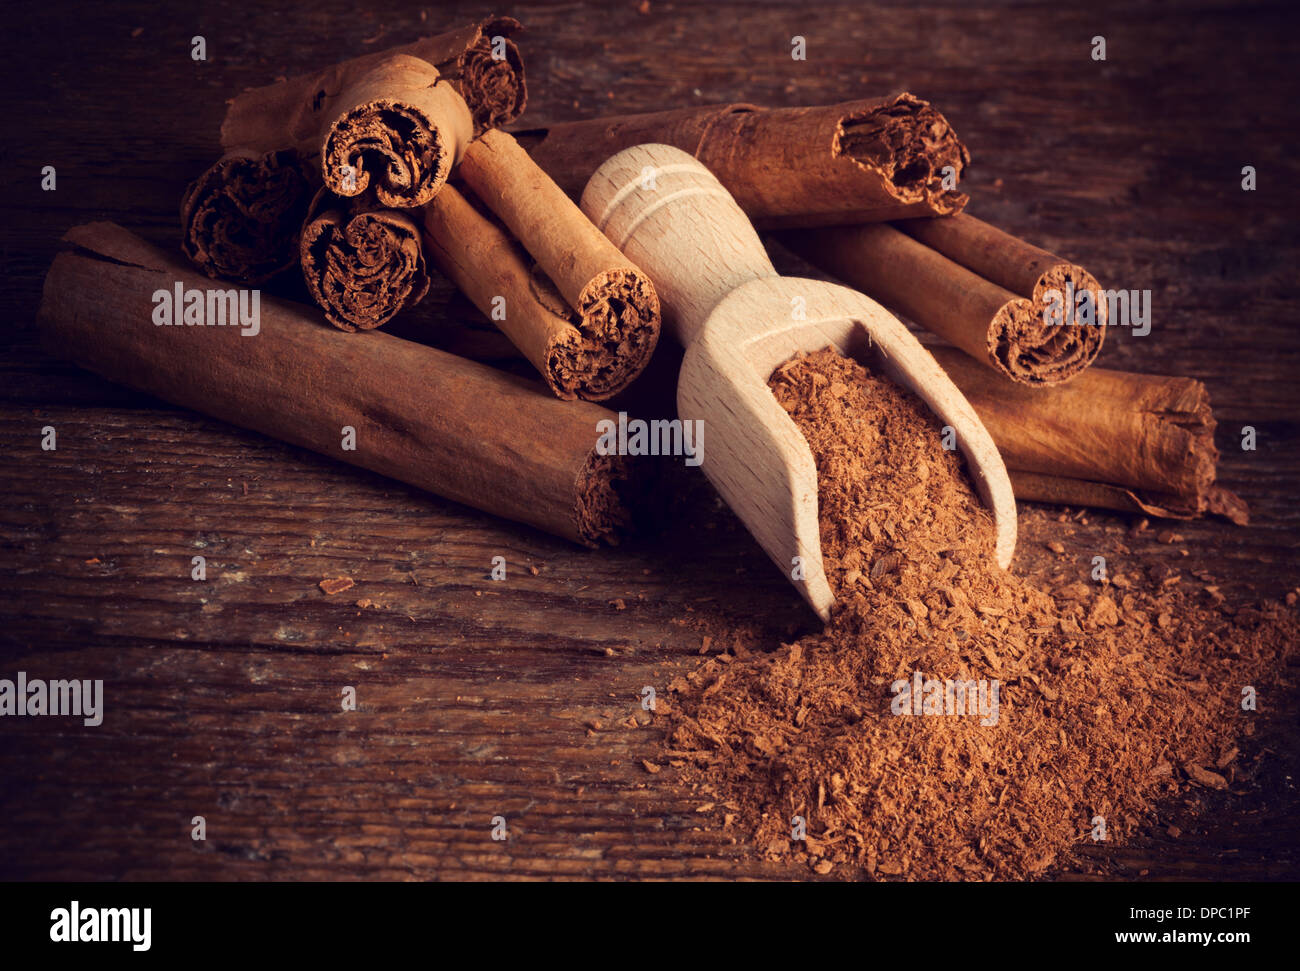 Sticks and ground ceylon cinnamon with wood spoon on wooden table Stock Photo